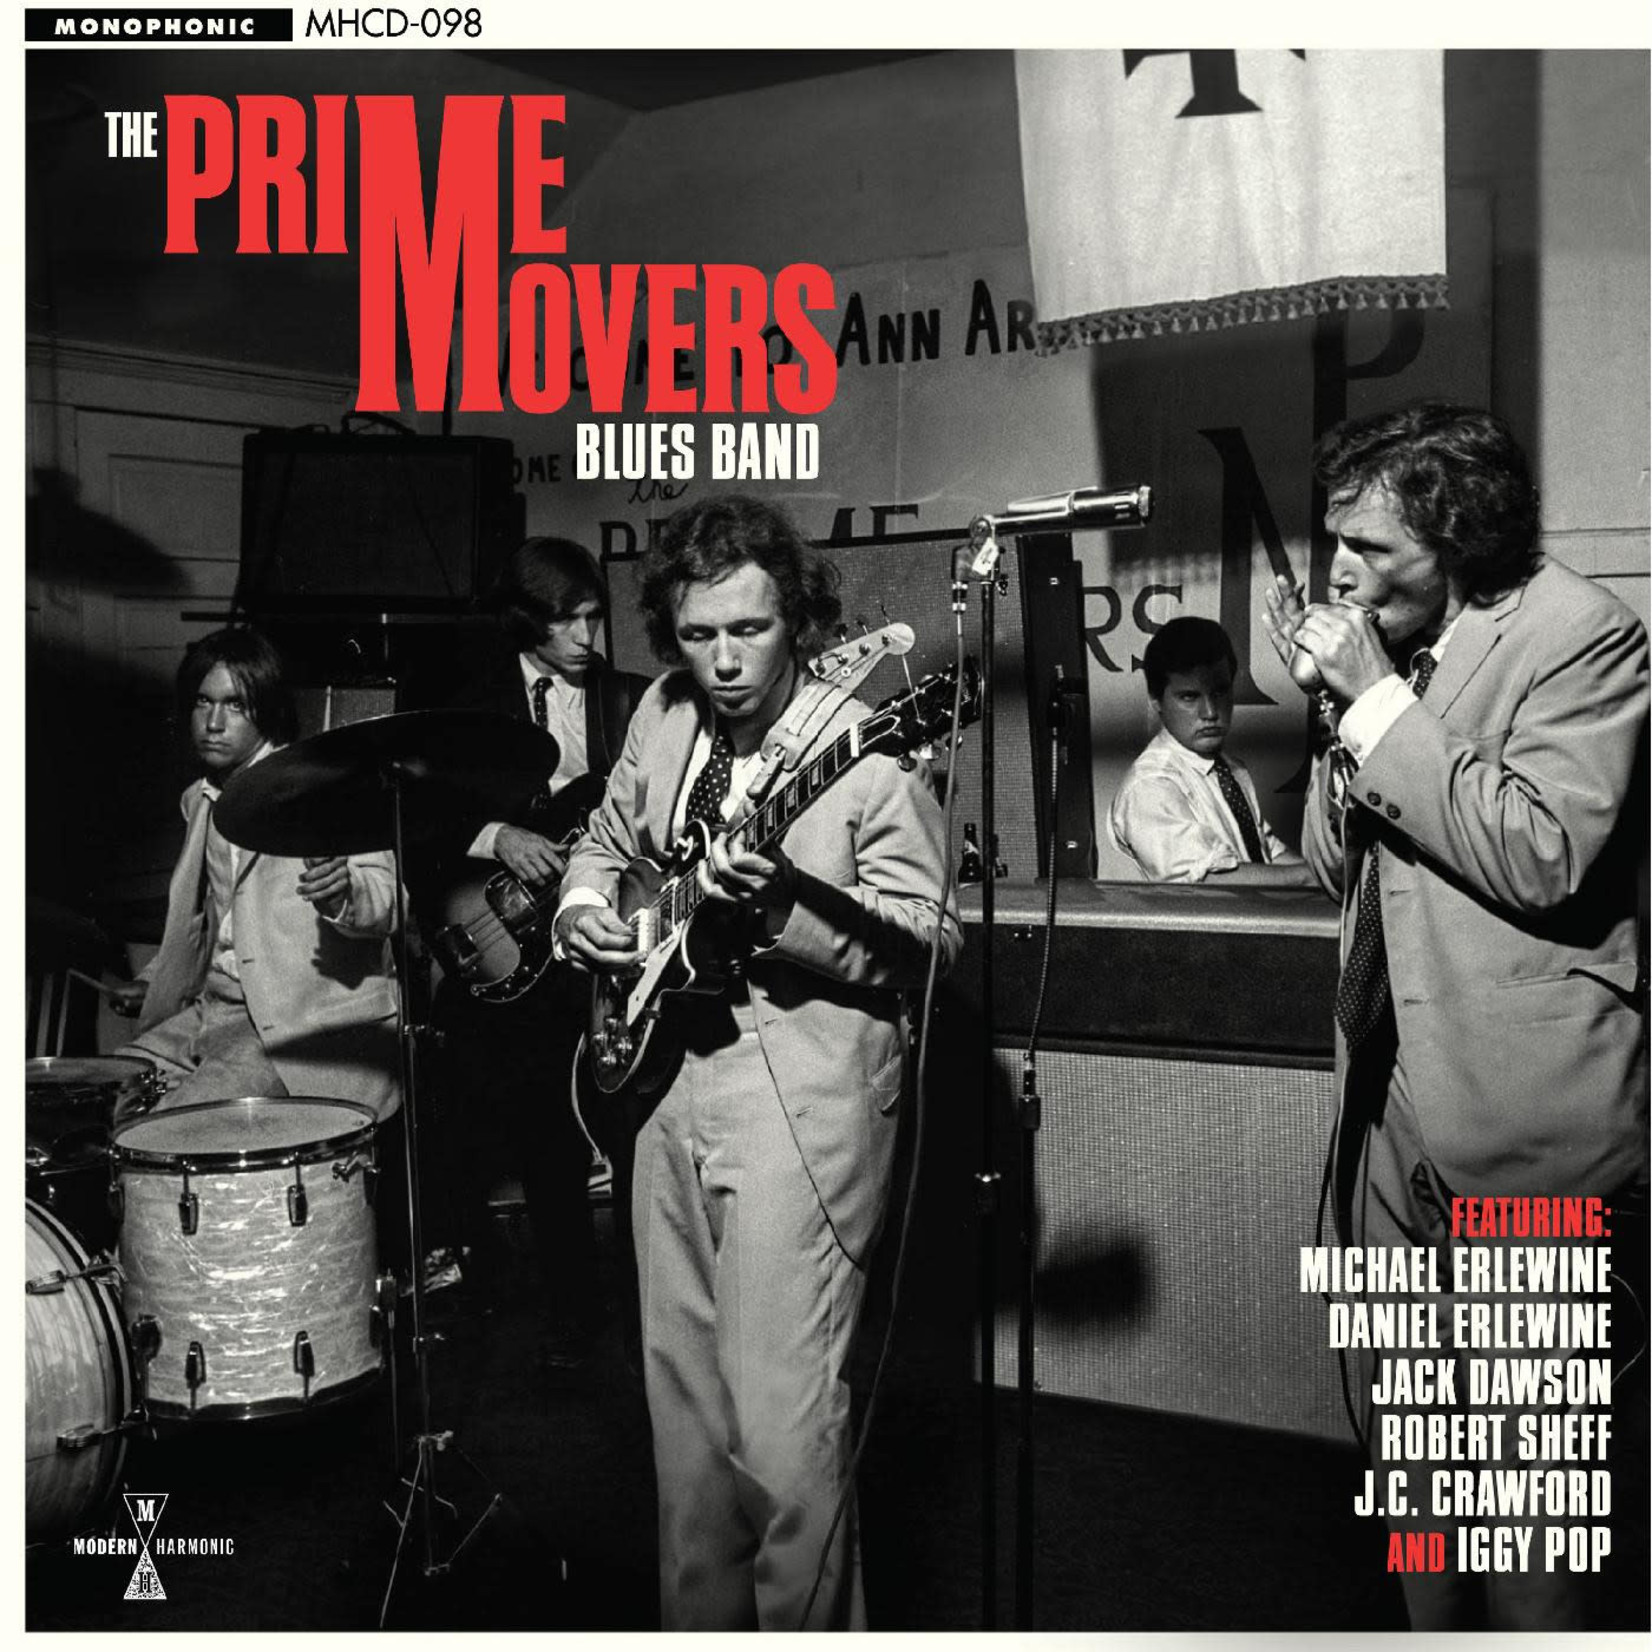 [New] The Prime Movers Blues Band - The Prime Movers Blues Band (2LP)